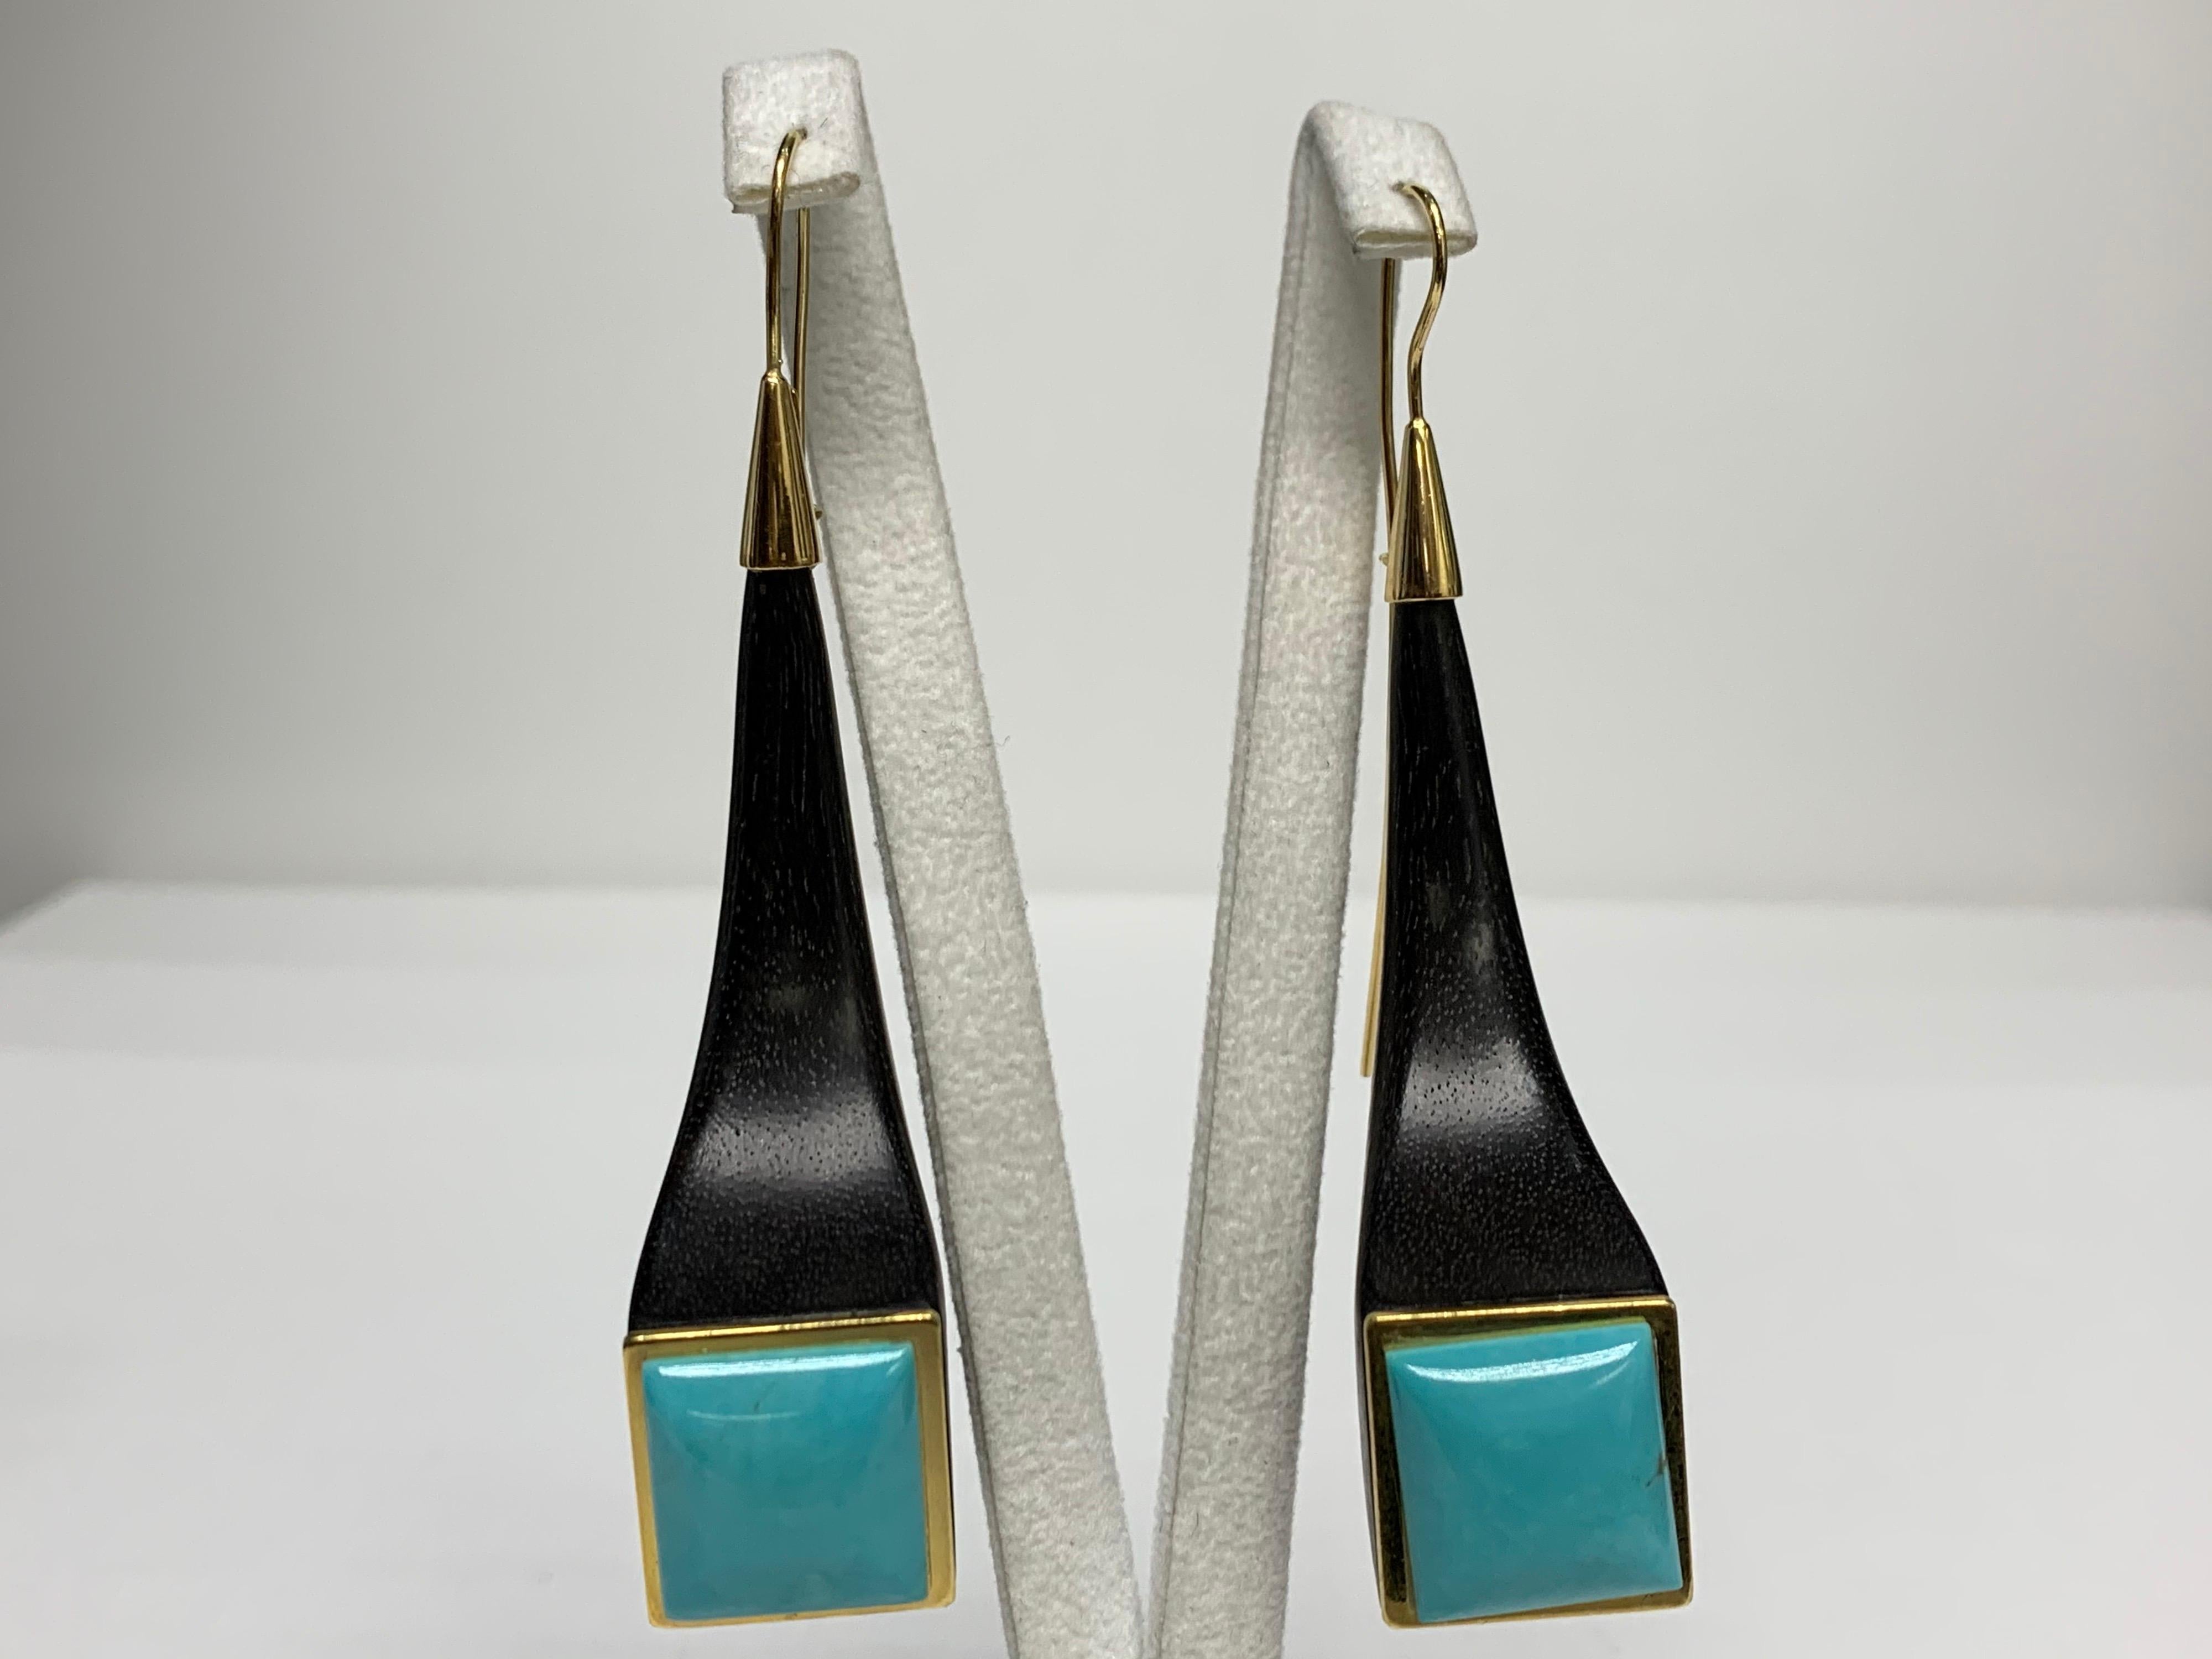 Ebony Wood and Turquoise Earrings from Italy. 

Featuring Turquoise Stone Earrings, Ebony Wood Hand Carved from Italy. 

This one-of-a-kind pair of earrings was created by hand is certified, appraisal included, 100% insured. Processed and shipped